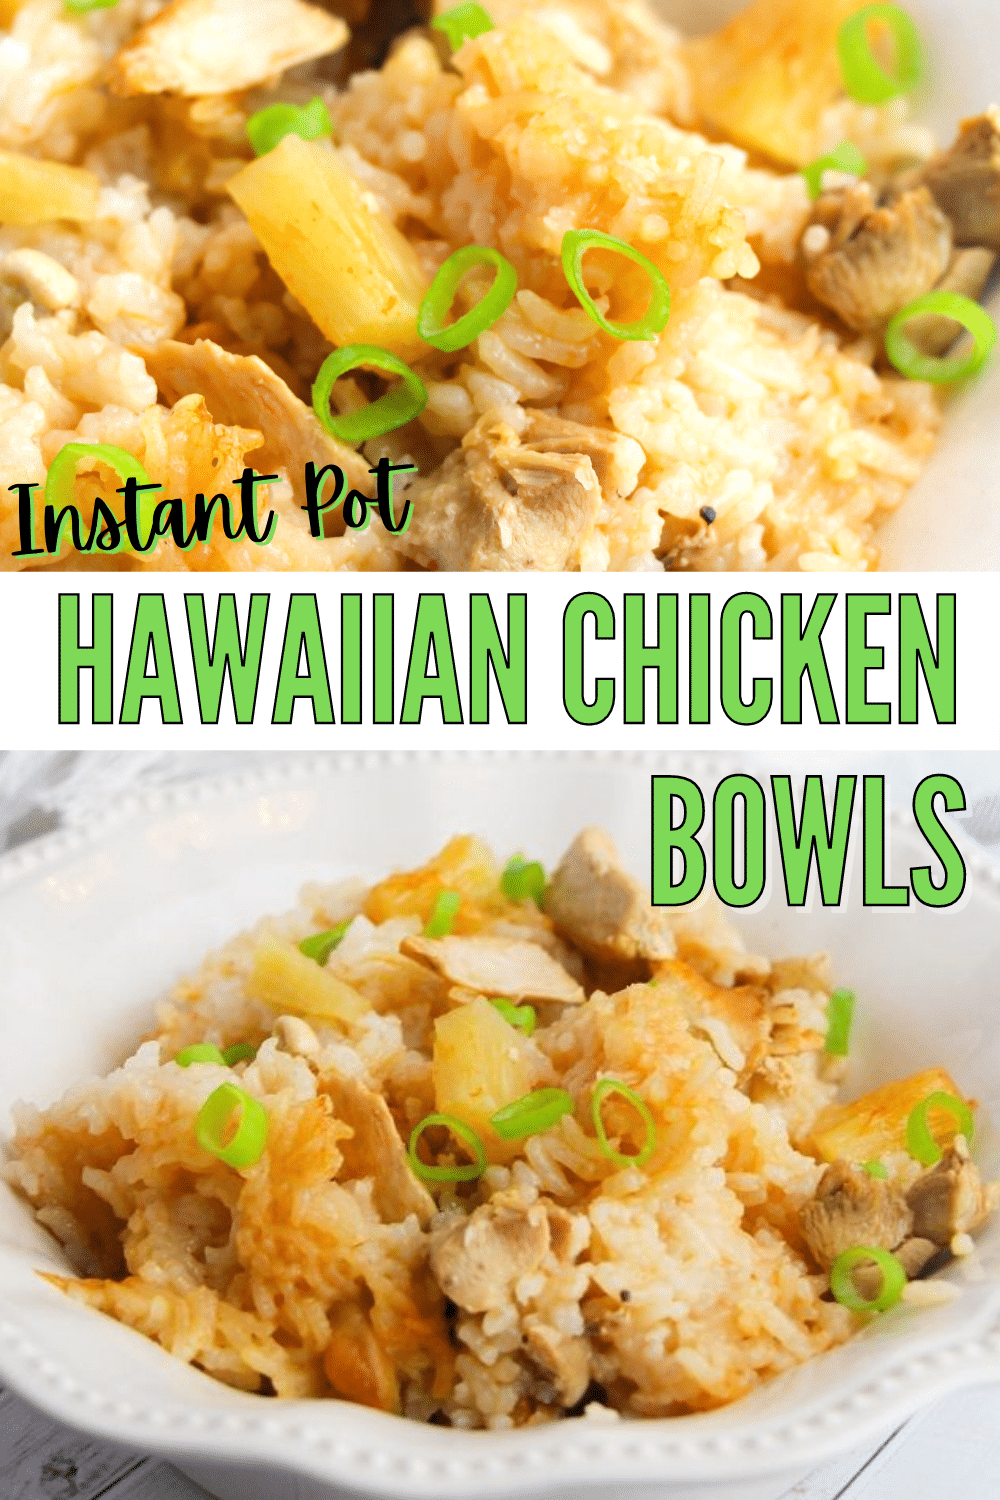 These Instant Pot Hawaiian Chicken Bowls are filled with deliciously sweet flavors that kids love, and they're ready in under 30 minutes! #instantpot #pressurecooker #hawaiianchicken #chickenrecipe via @wondermomwannab